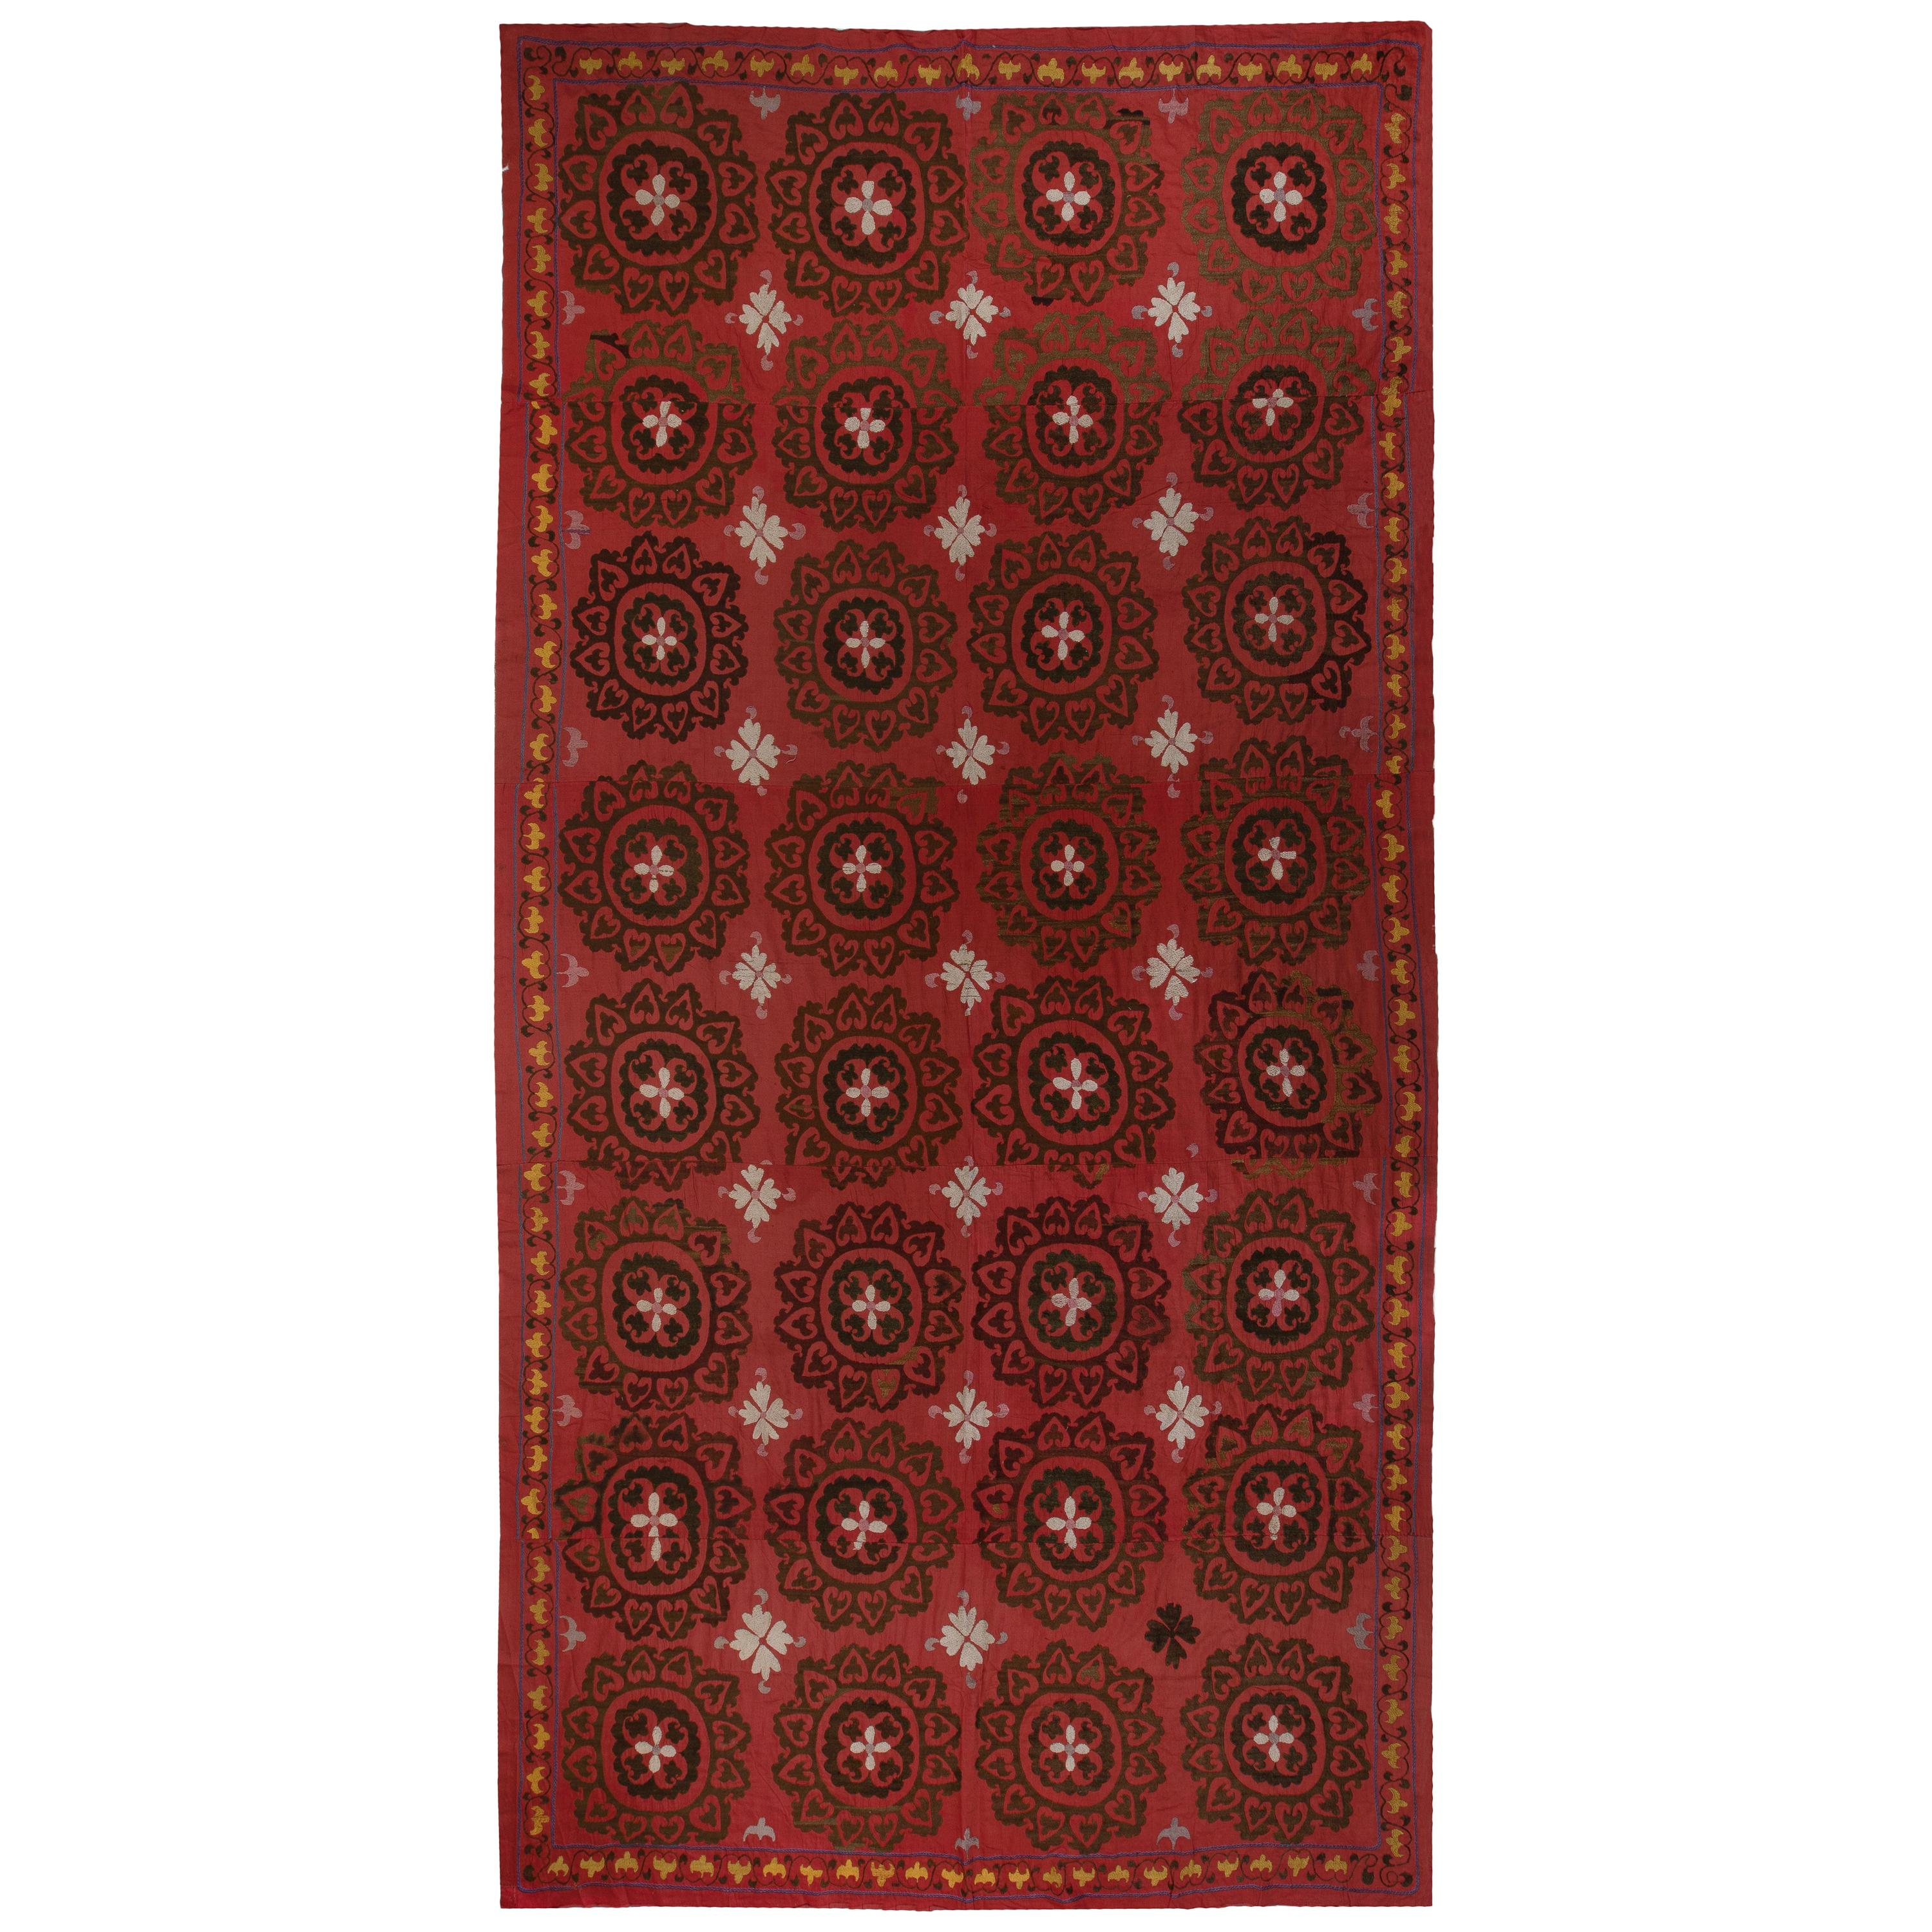 6.6x12.3 Ft Central Asian Suzani Textile, Embroidered Cotton & Silk Wall Hanging For Sale